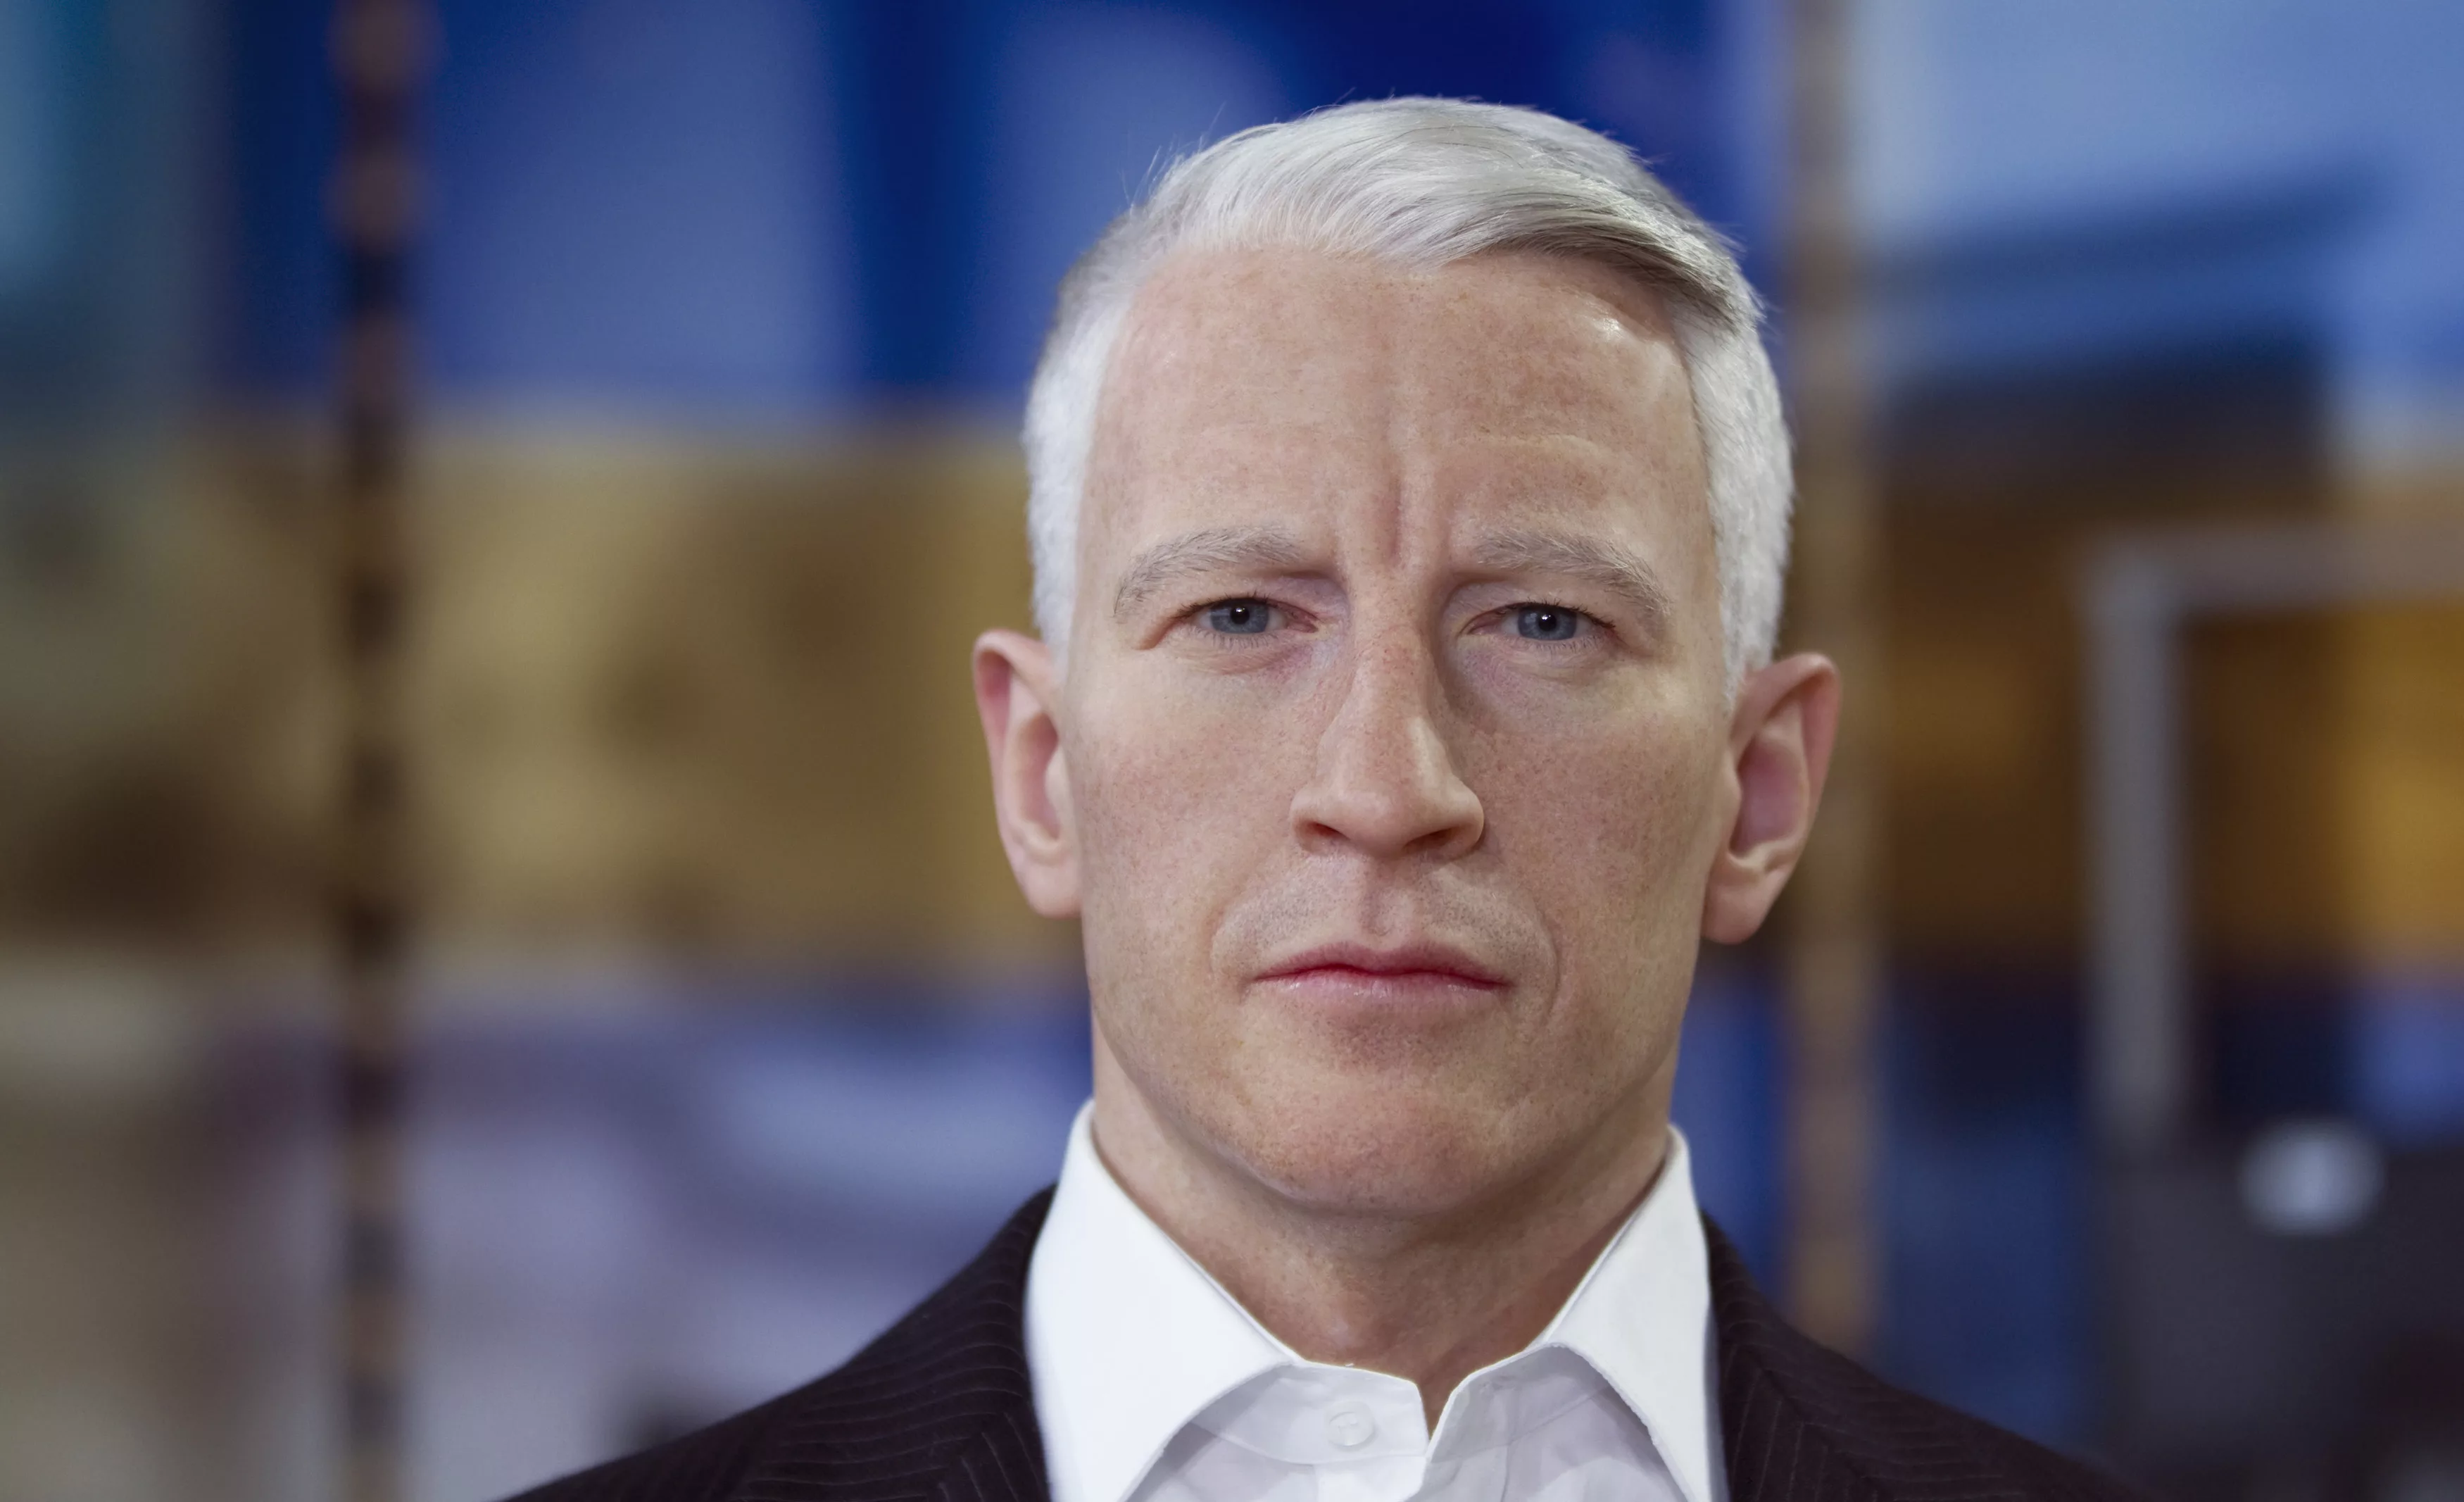 a-wax-figure-of-television-journalist-anderson-cooper-created-by-madame-tussauds-stands-on-set-of-coopers-new-talk-show-anderson-in-new-york